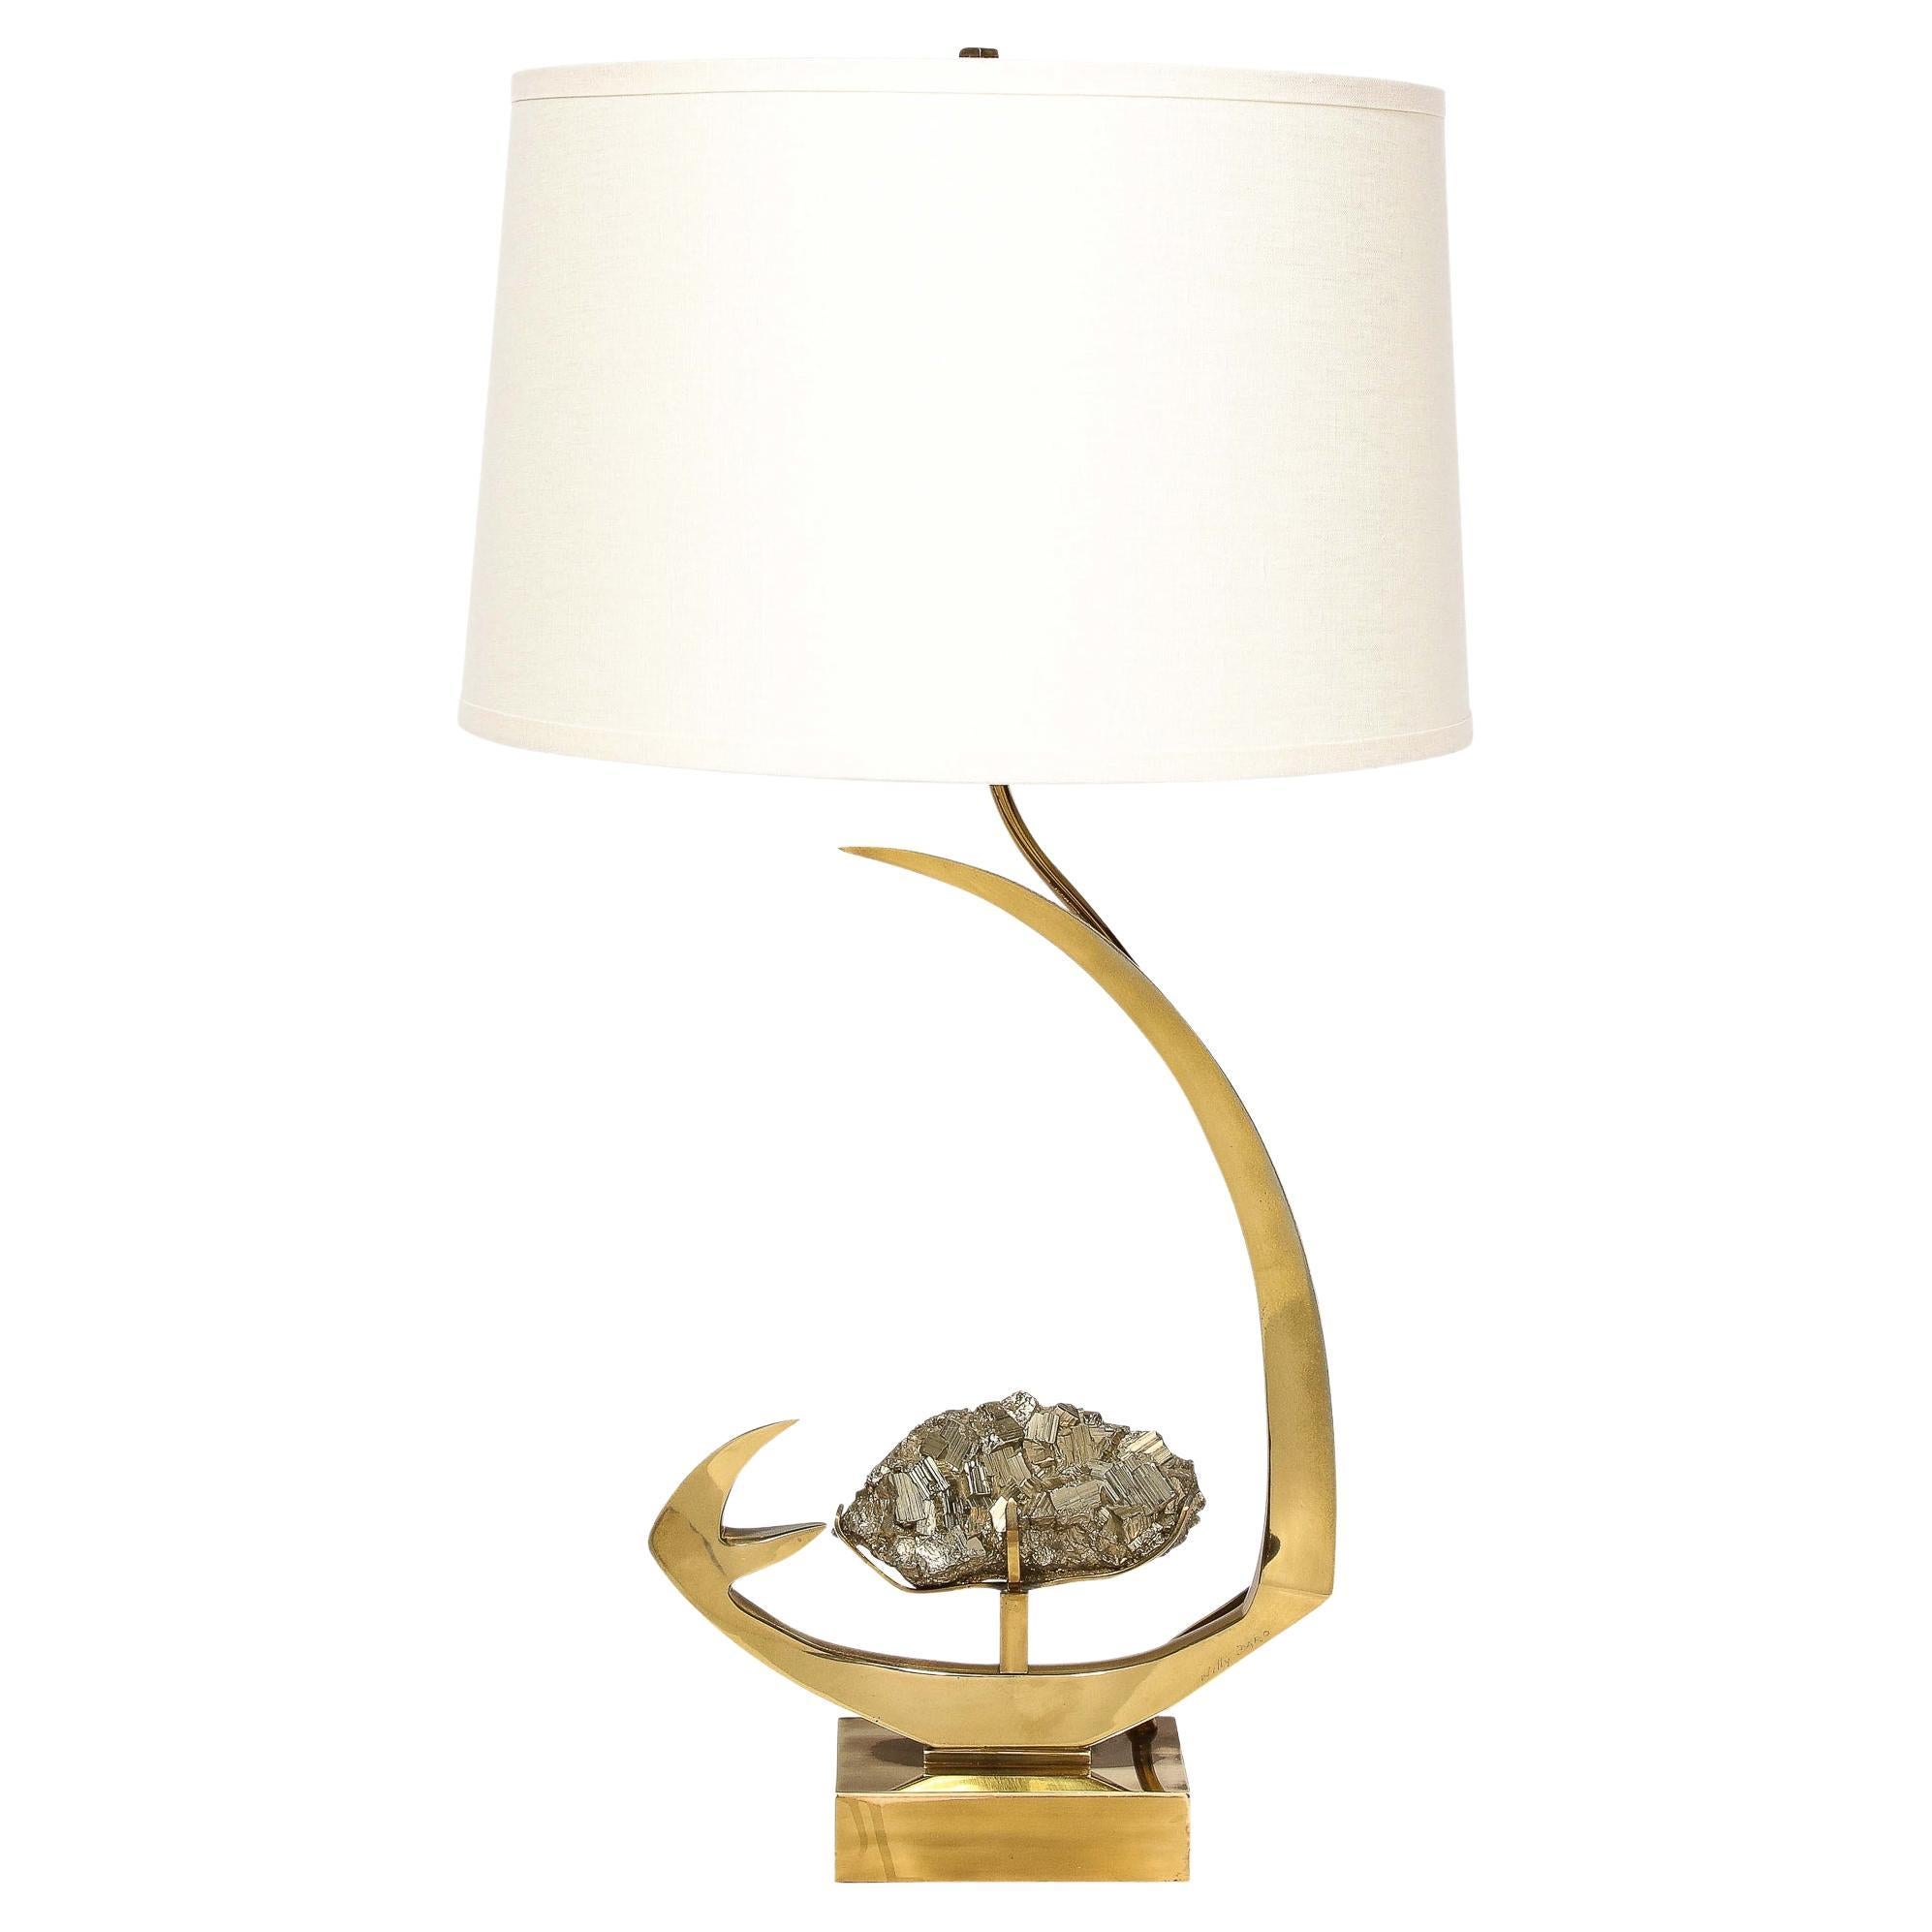 Mid-Century Modern Sculptural Polished Brass & Pyrite Table Lamp by Willy Daro For Sale